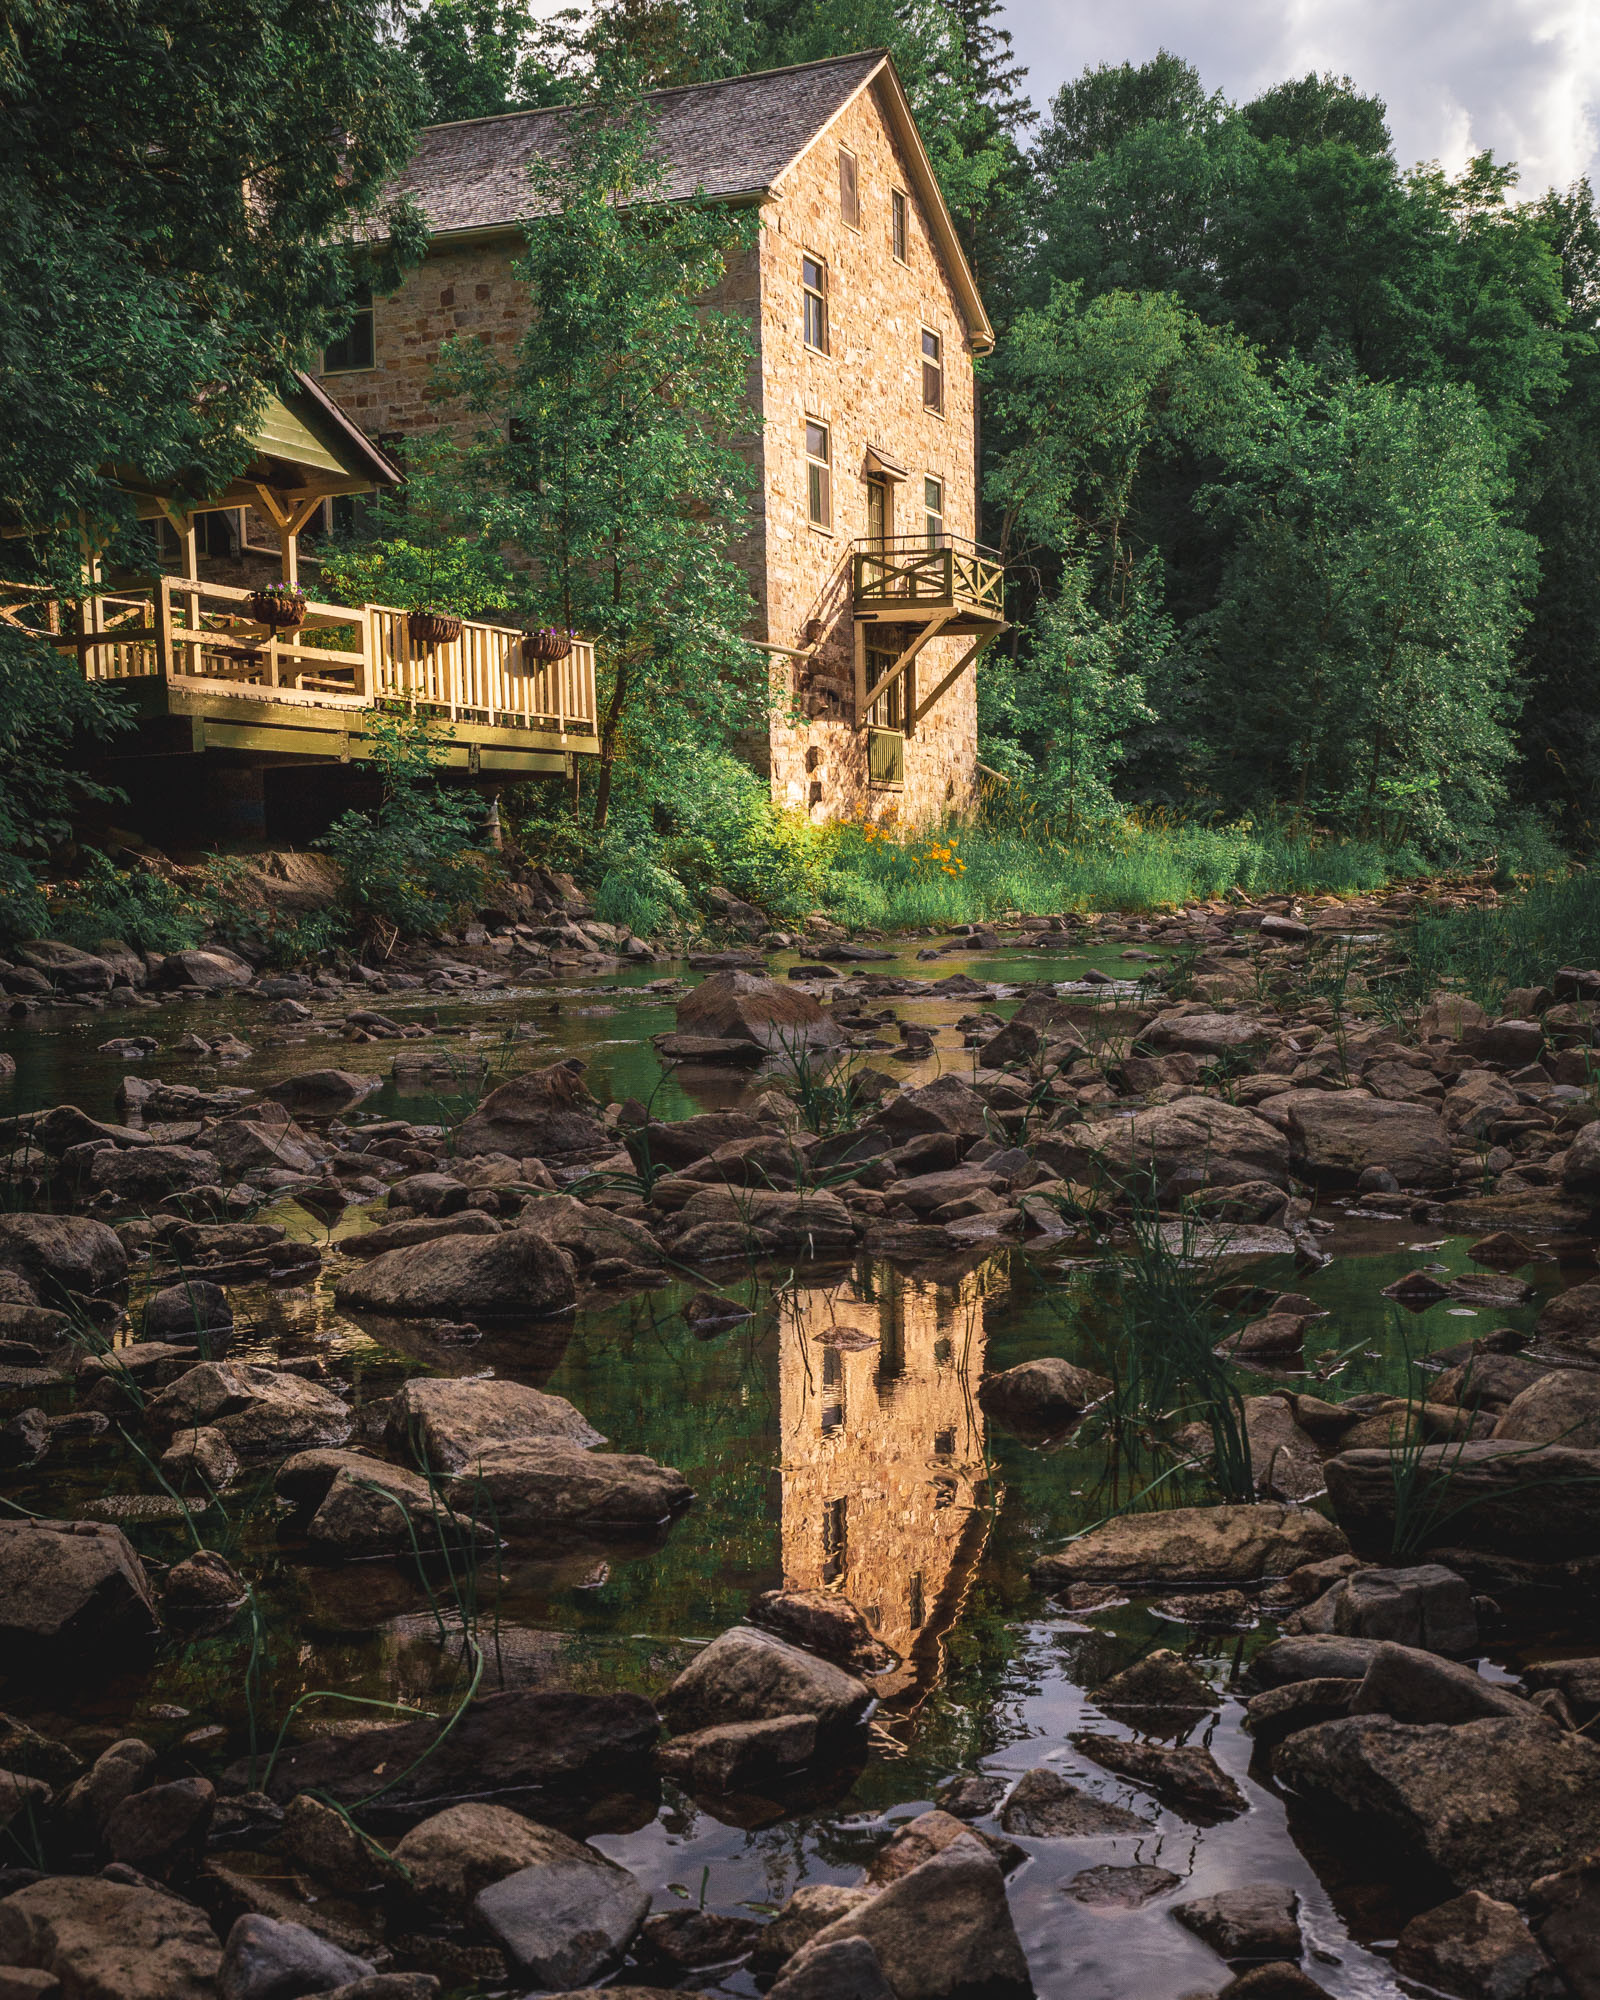 An old mill sitting on a small body of rocky water